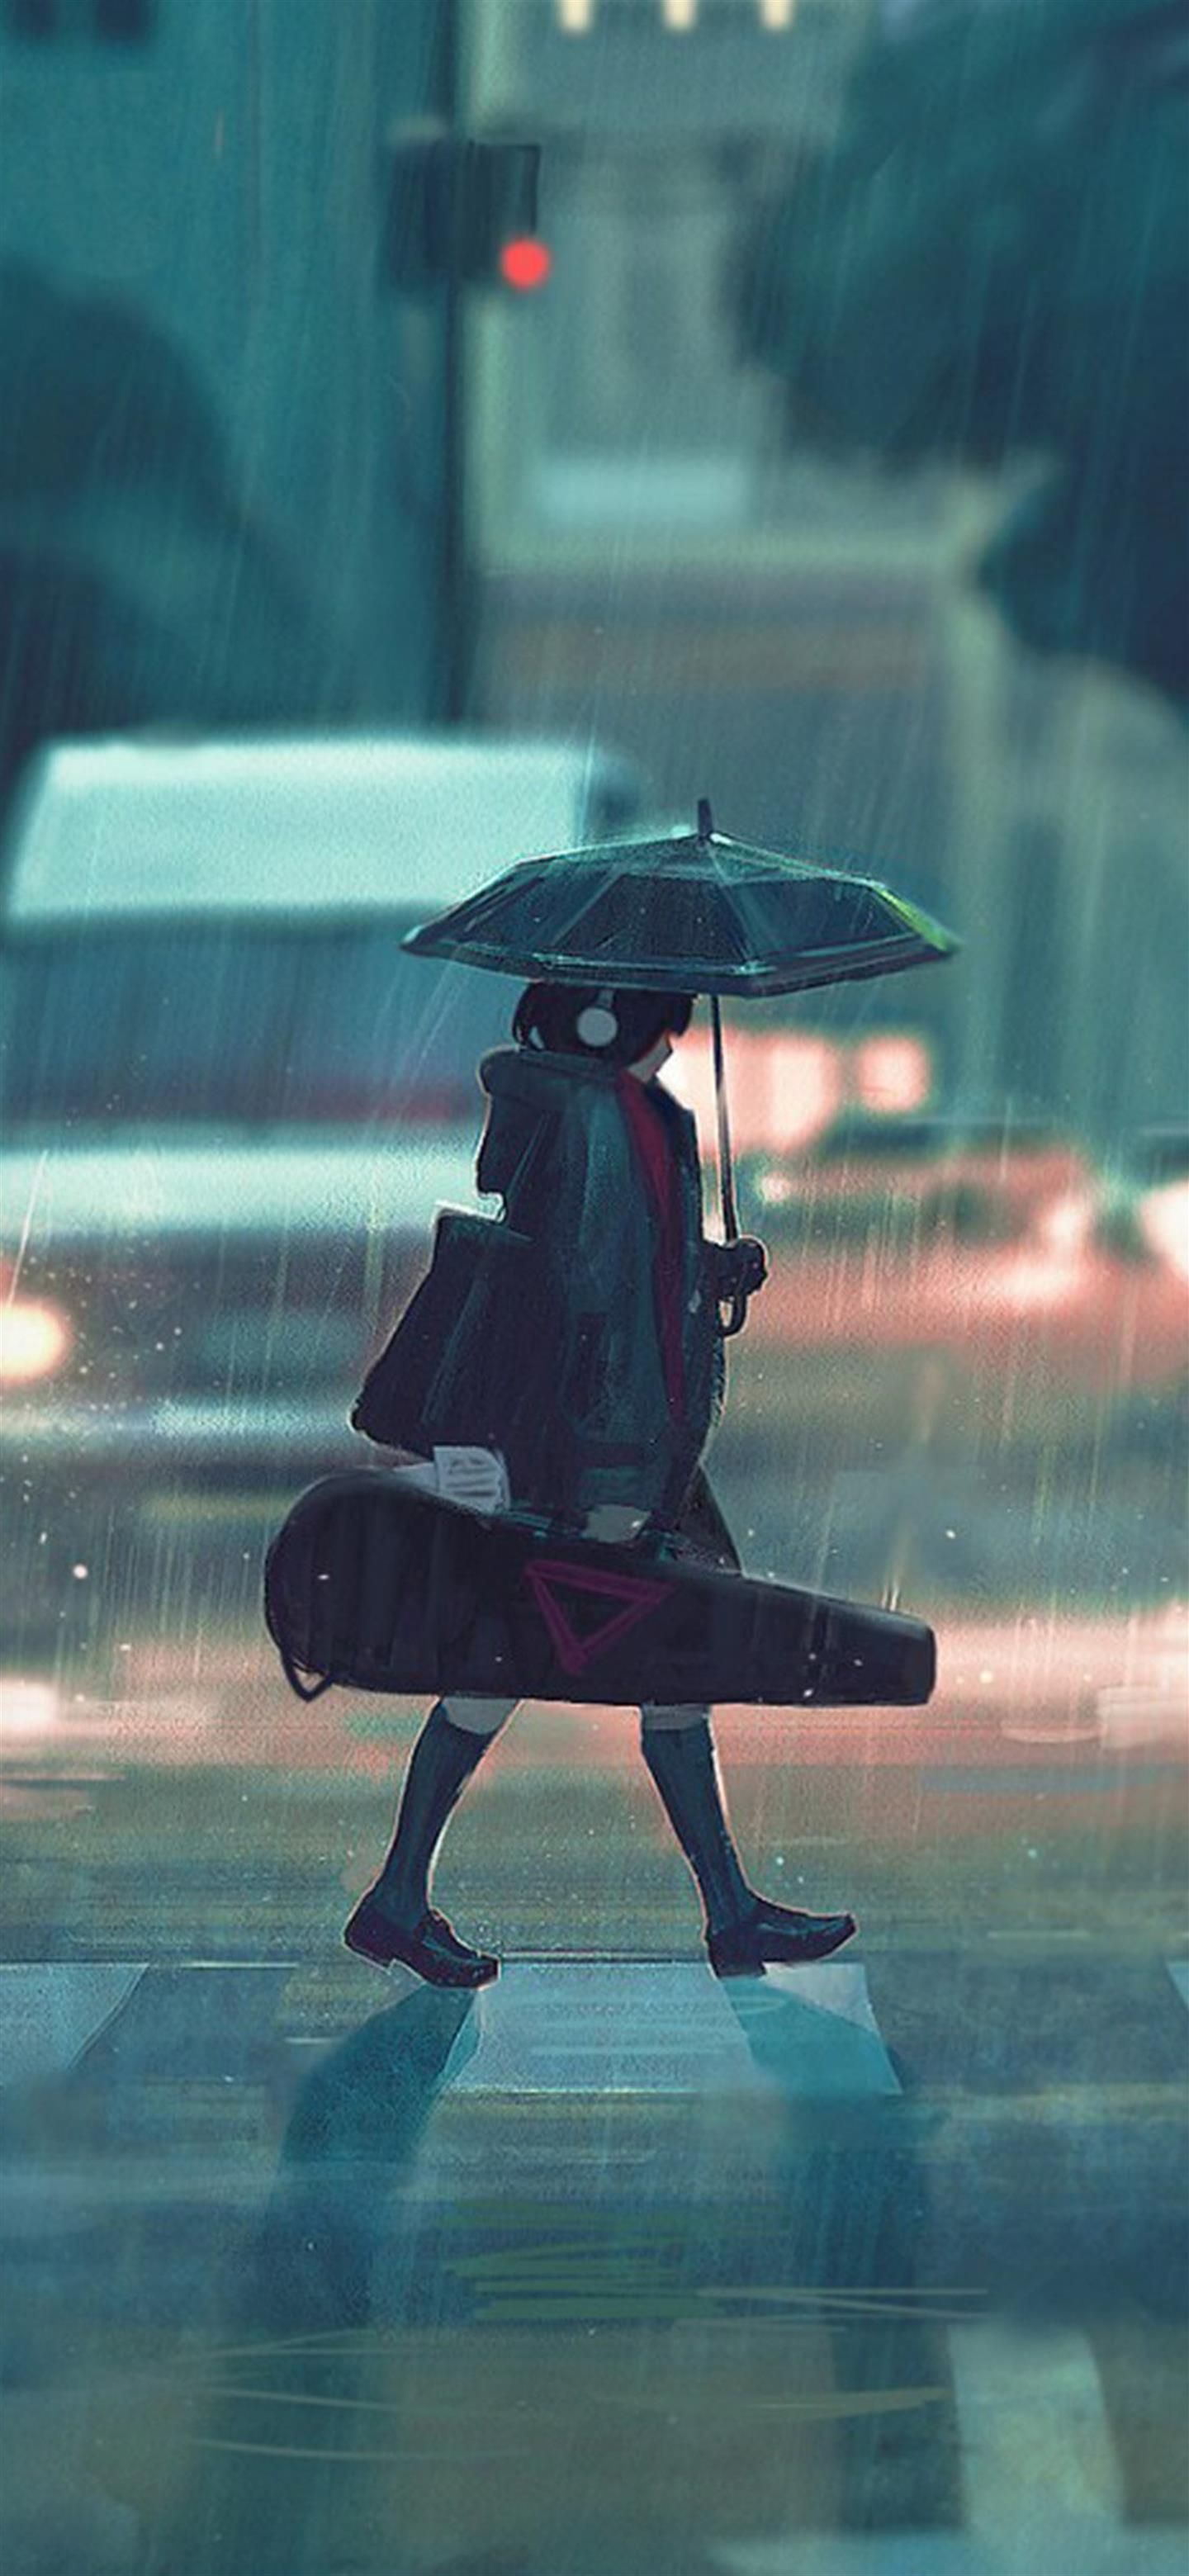 rainy day anime paint girl Phone Wallpaper Download